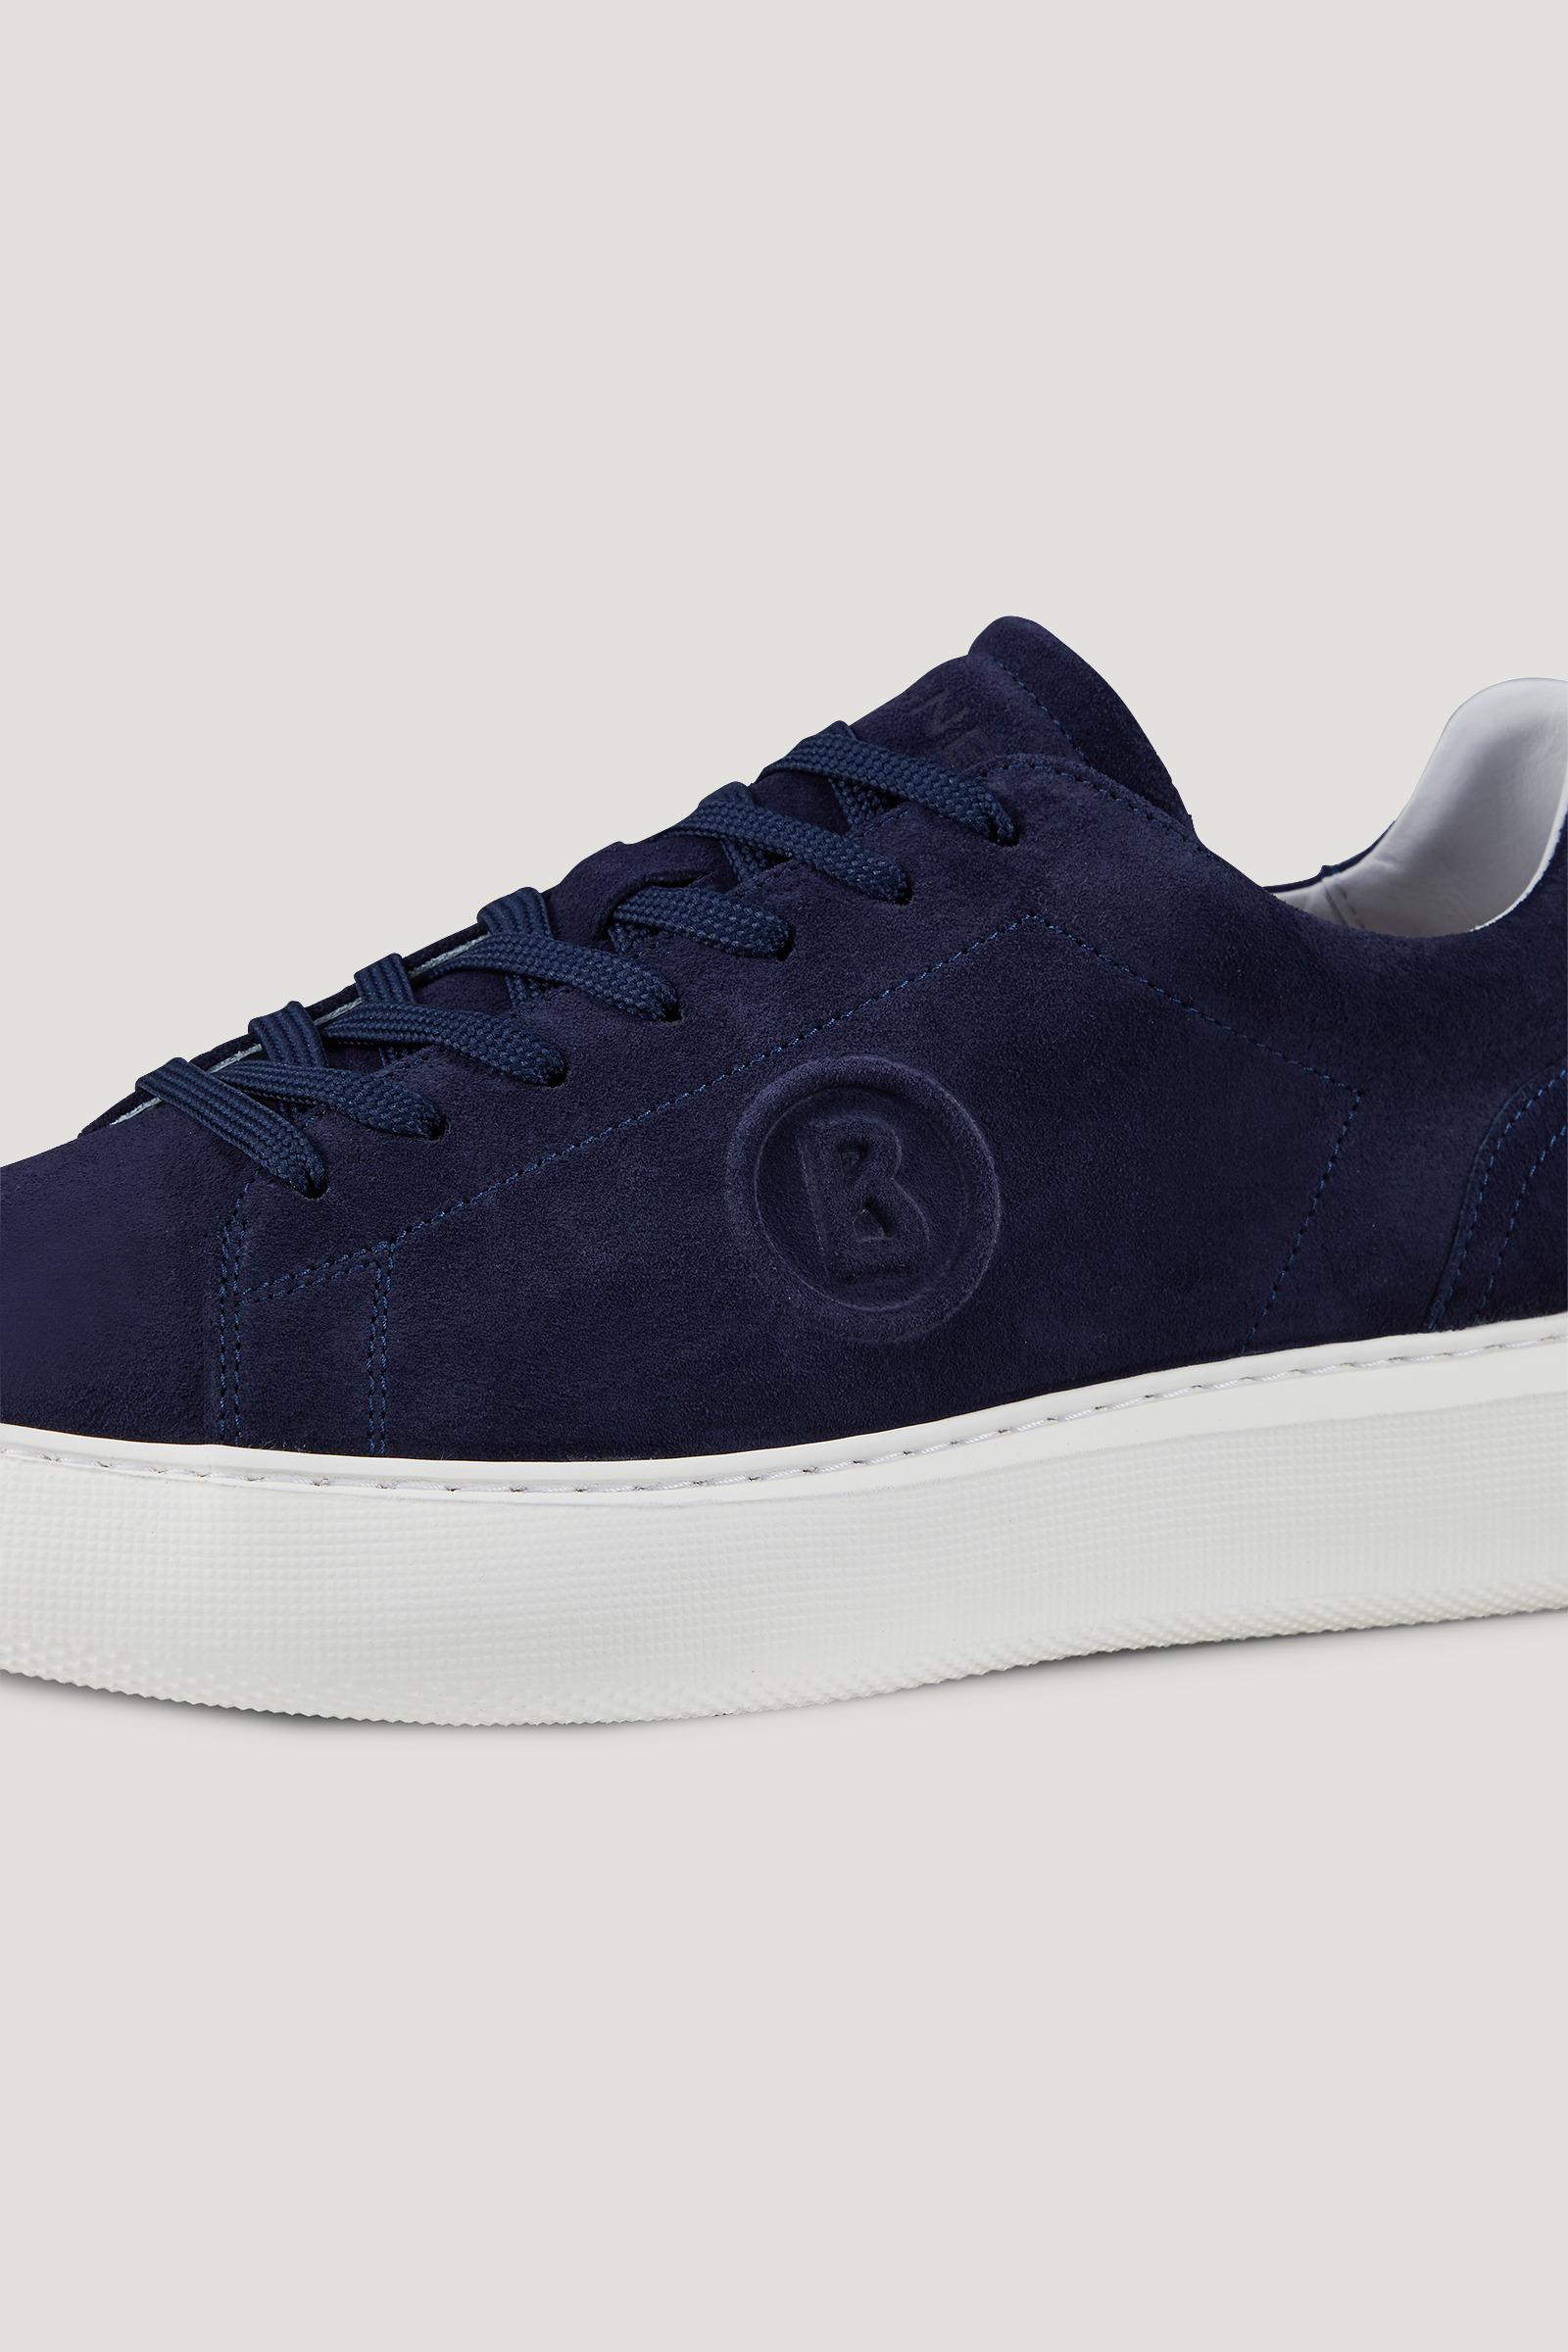 Bogner New Berlin Trainers in Navy Blue (Blue) for Men | Lyst Canada